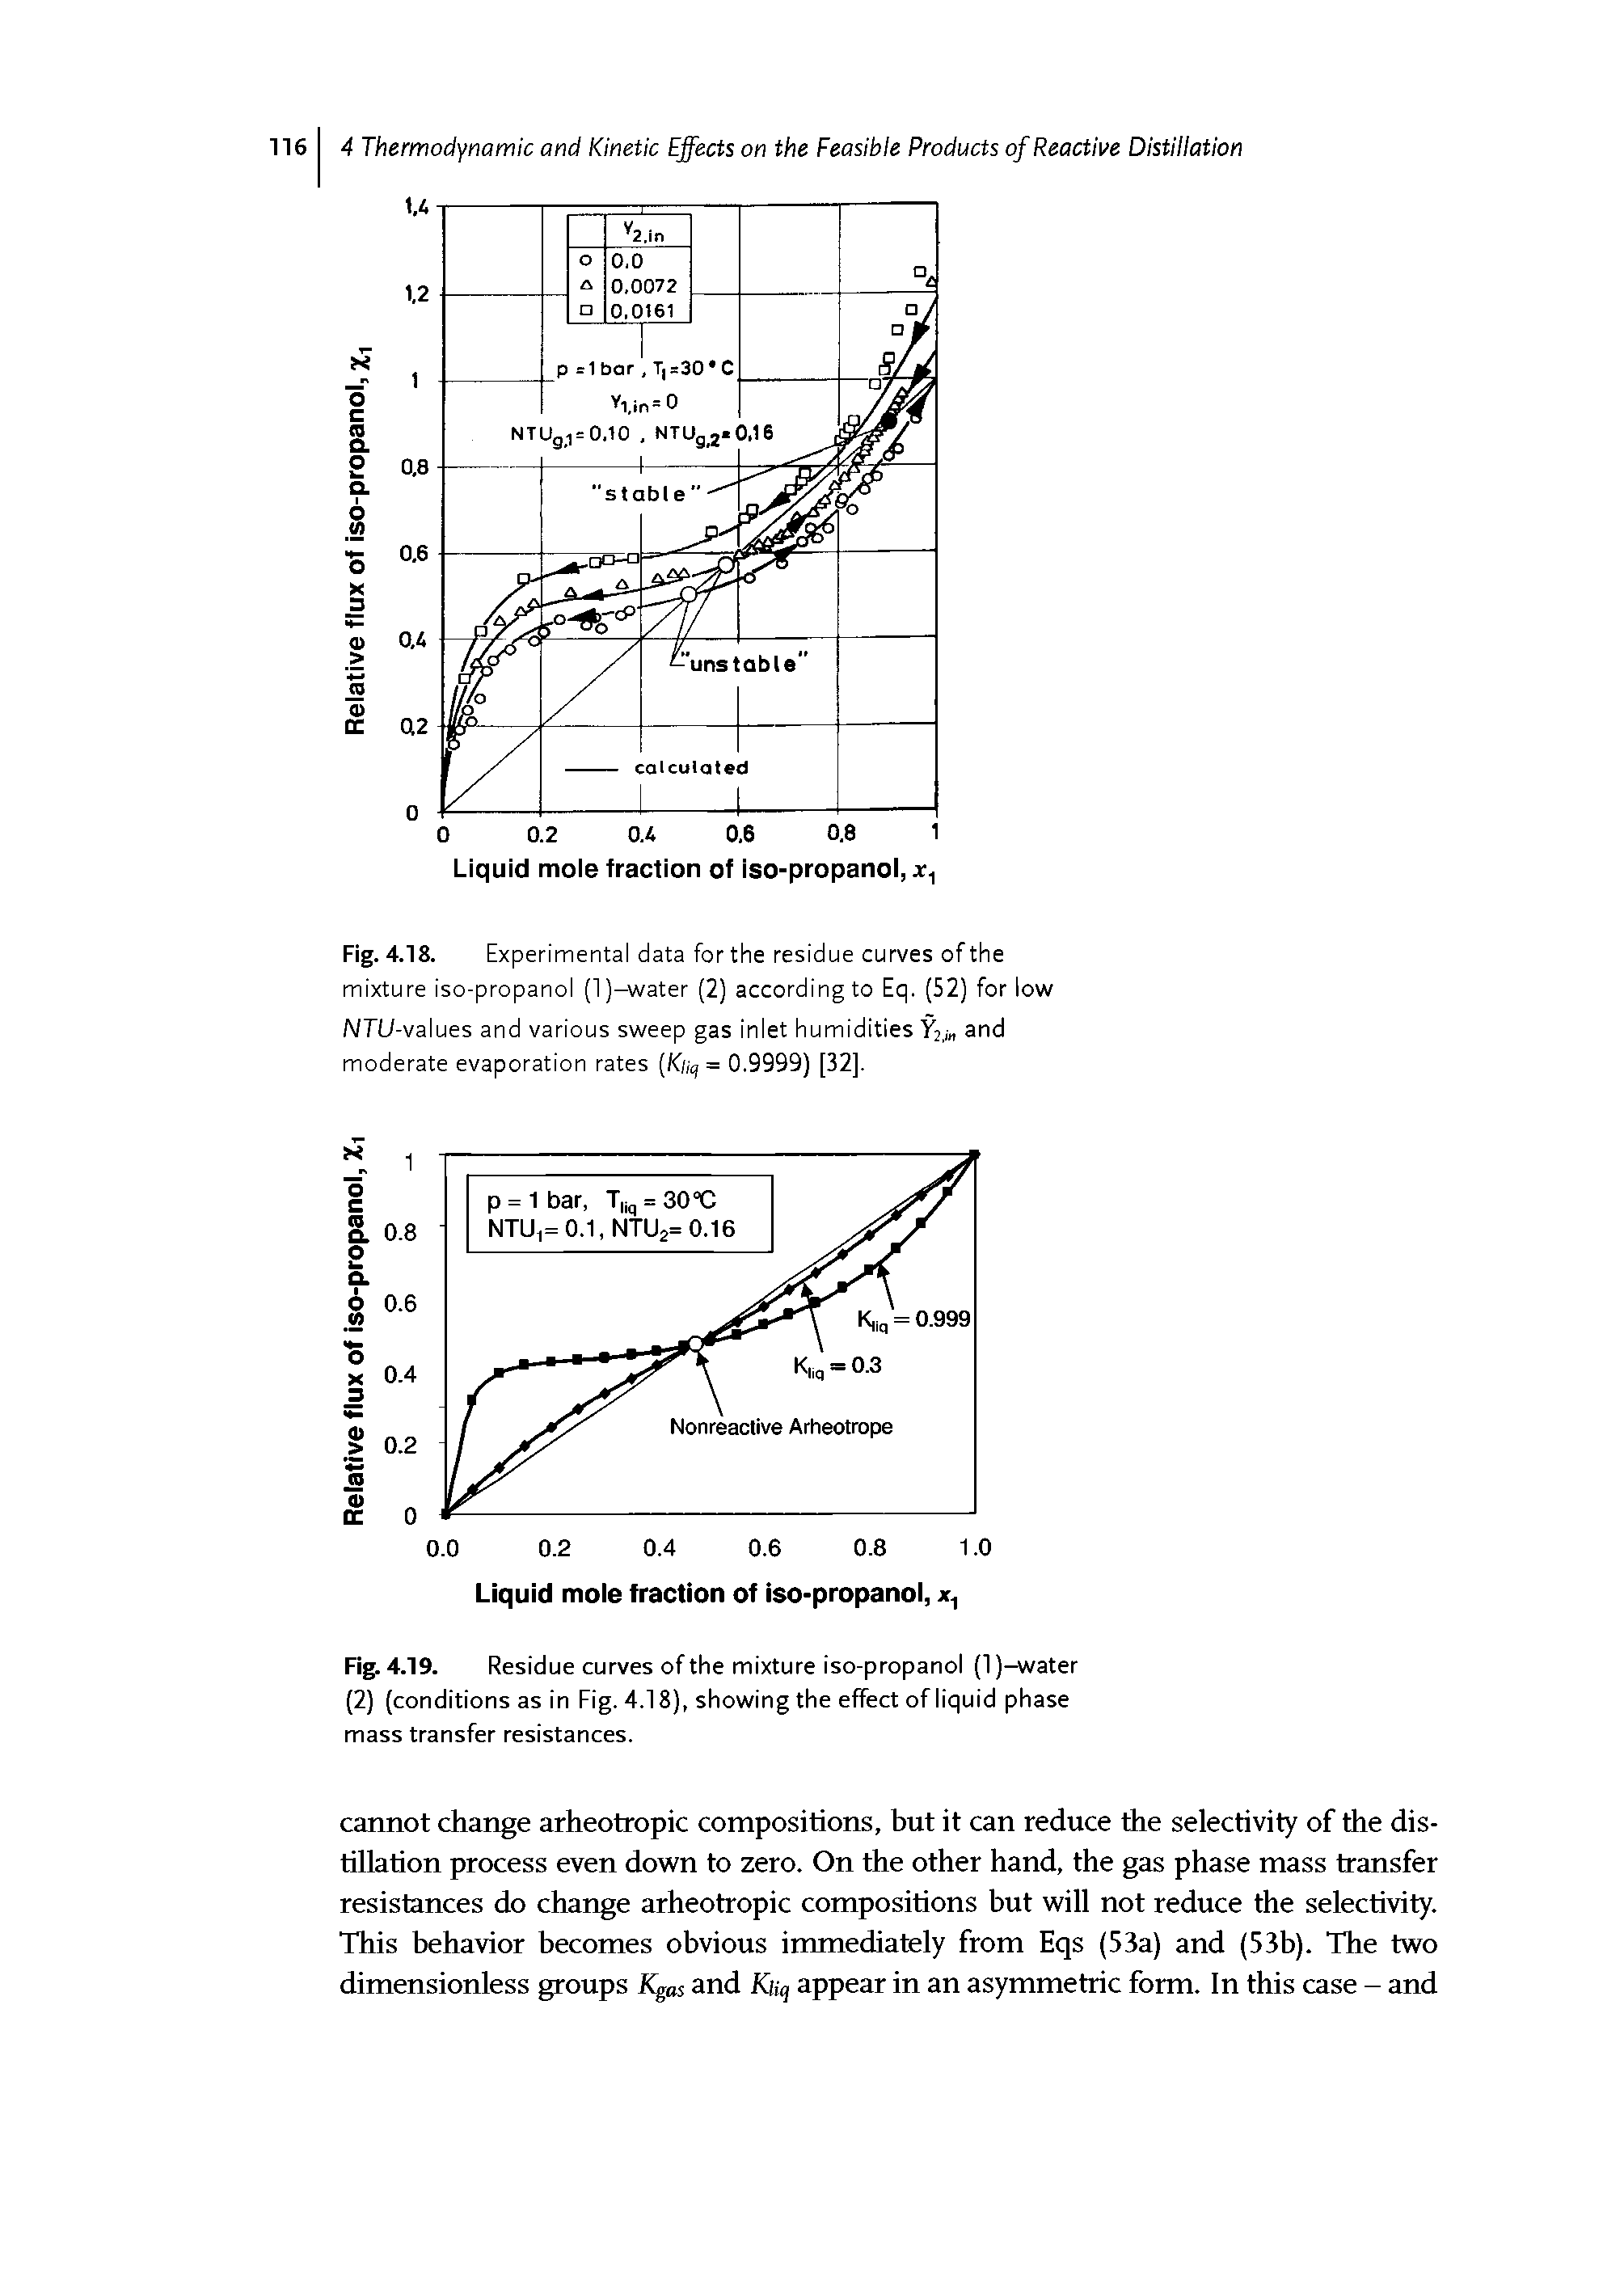 Fig. 4.18. Experimental data for the residue curves of the mixture iso-propanol (1 )-water (2) according to Eq. (52) for low /VTU-values and various sweep gas inlet humidities Y2,m and moderate evaporation rates (Knq = 0.9999) [32].